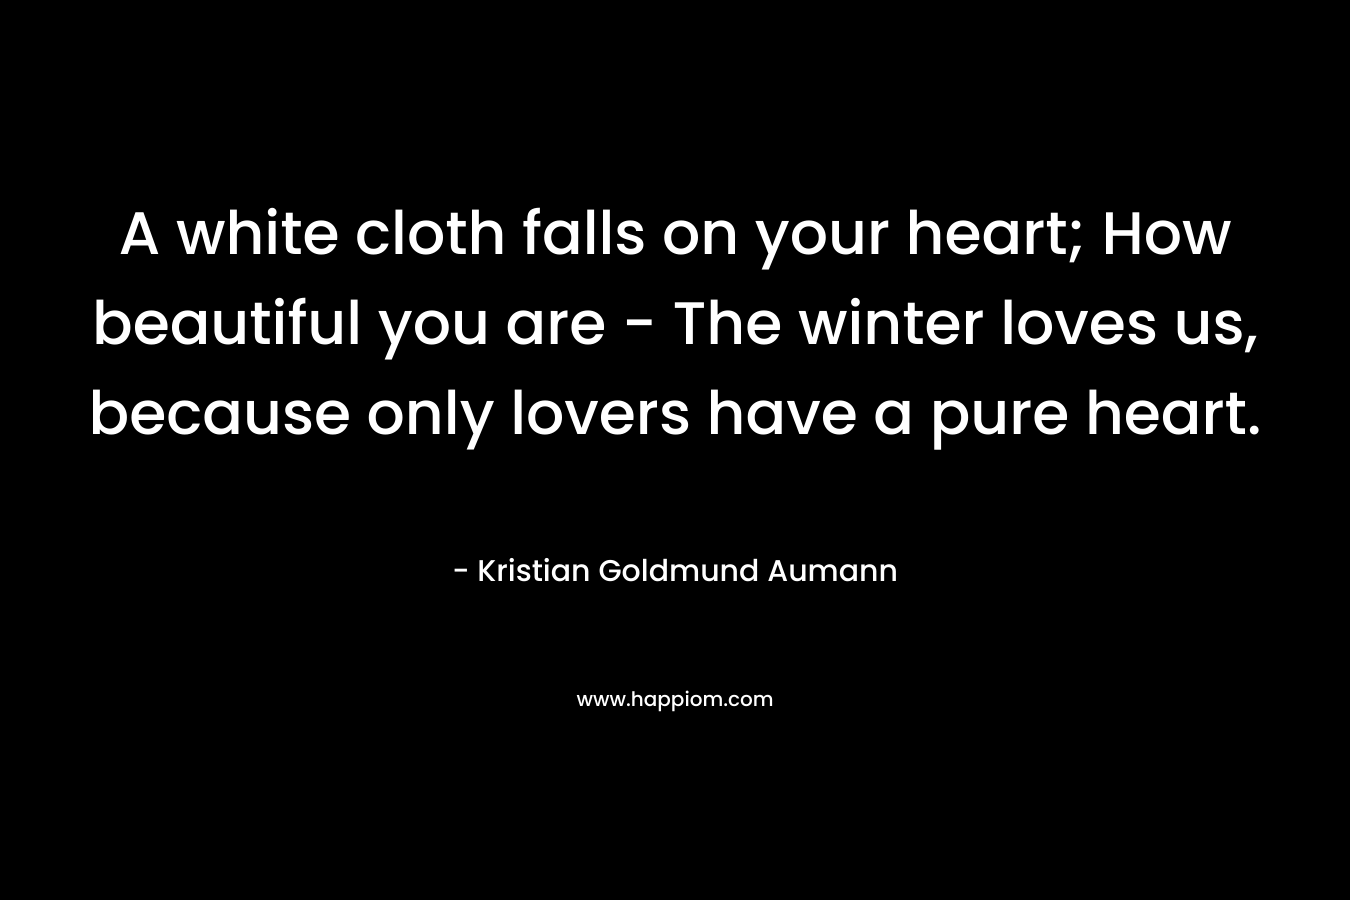 A white cloth falls on your heart; How beautiful you are - The winter loves us, because only lovers have a pure heart.